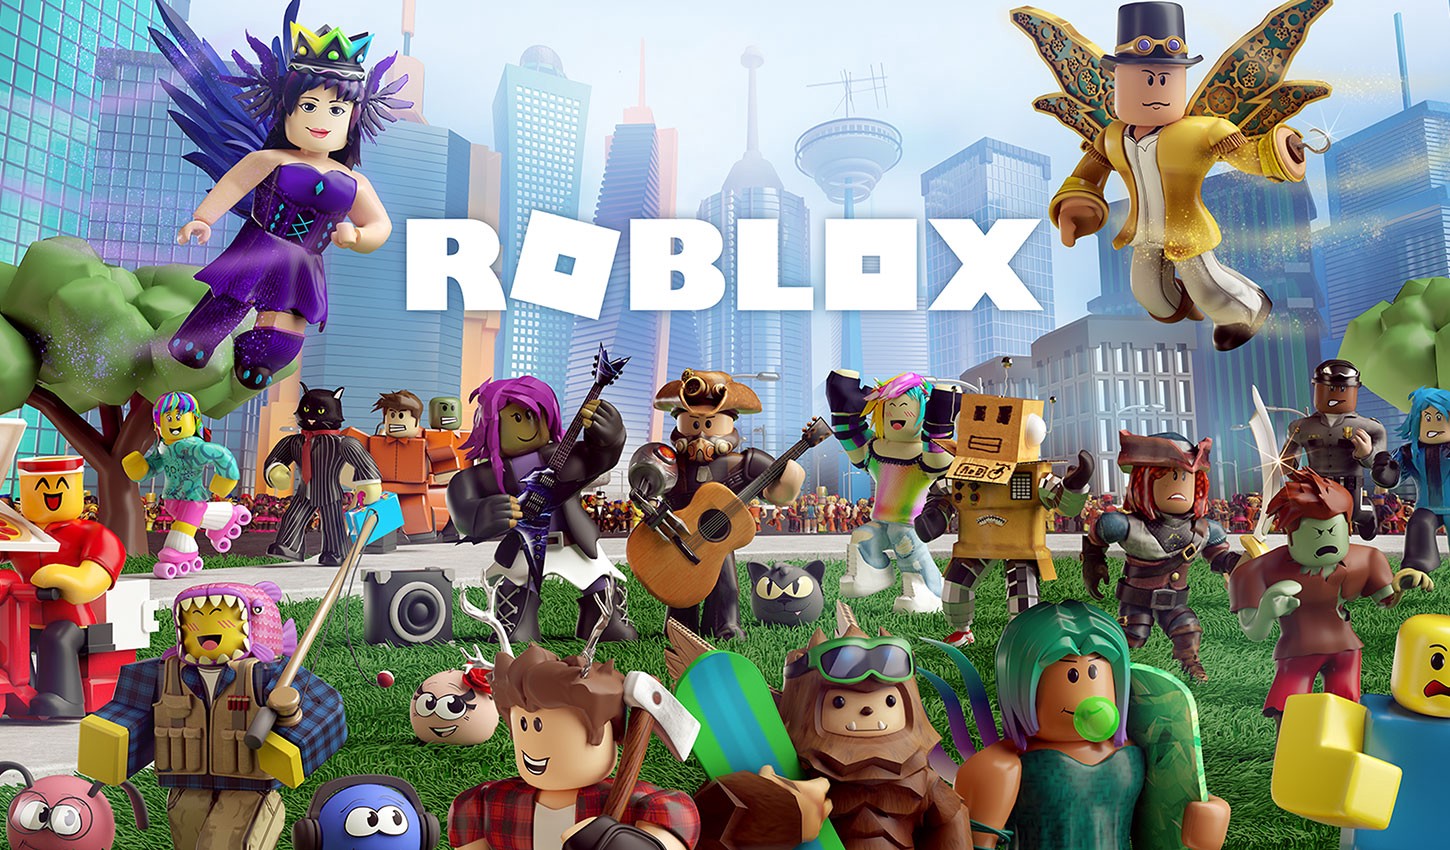 Download Play in Creative and Social 3D World of Roblox Wallpaper